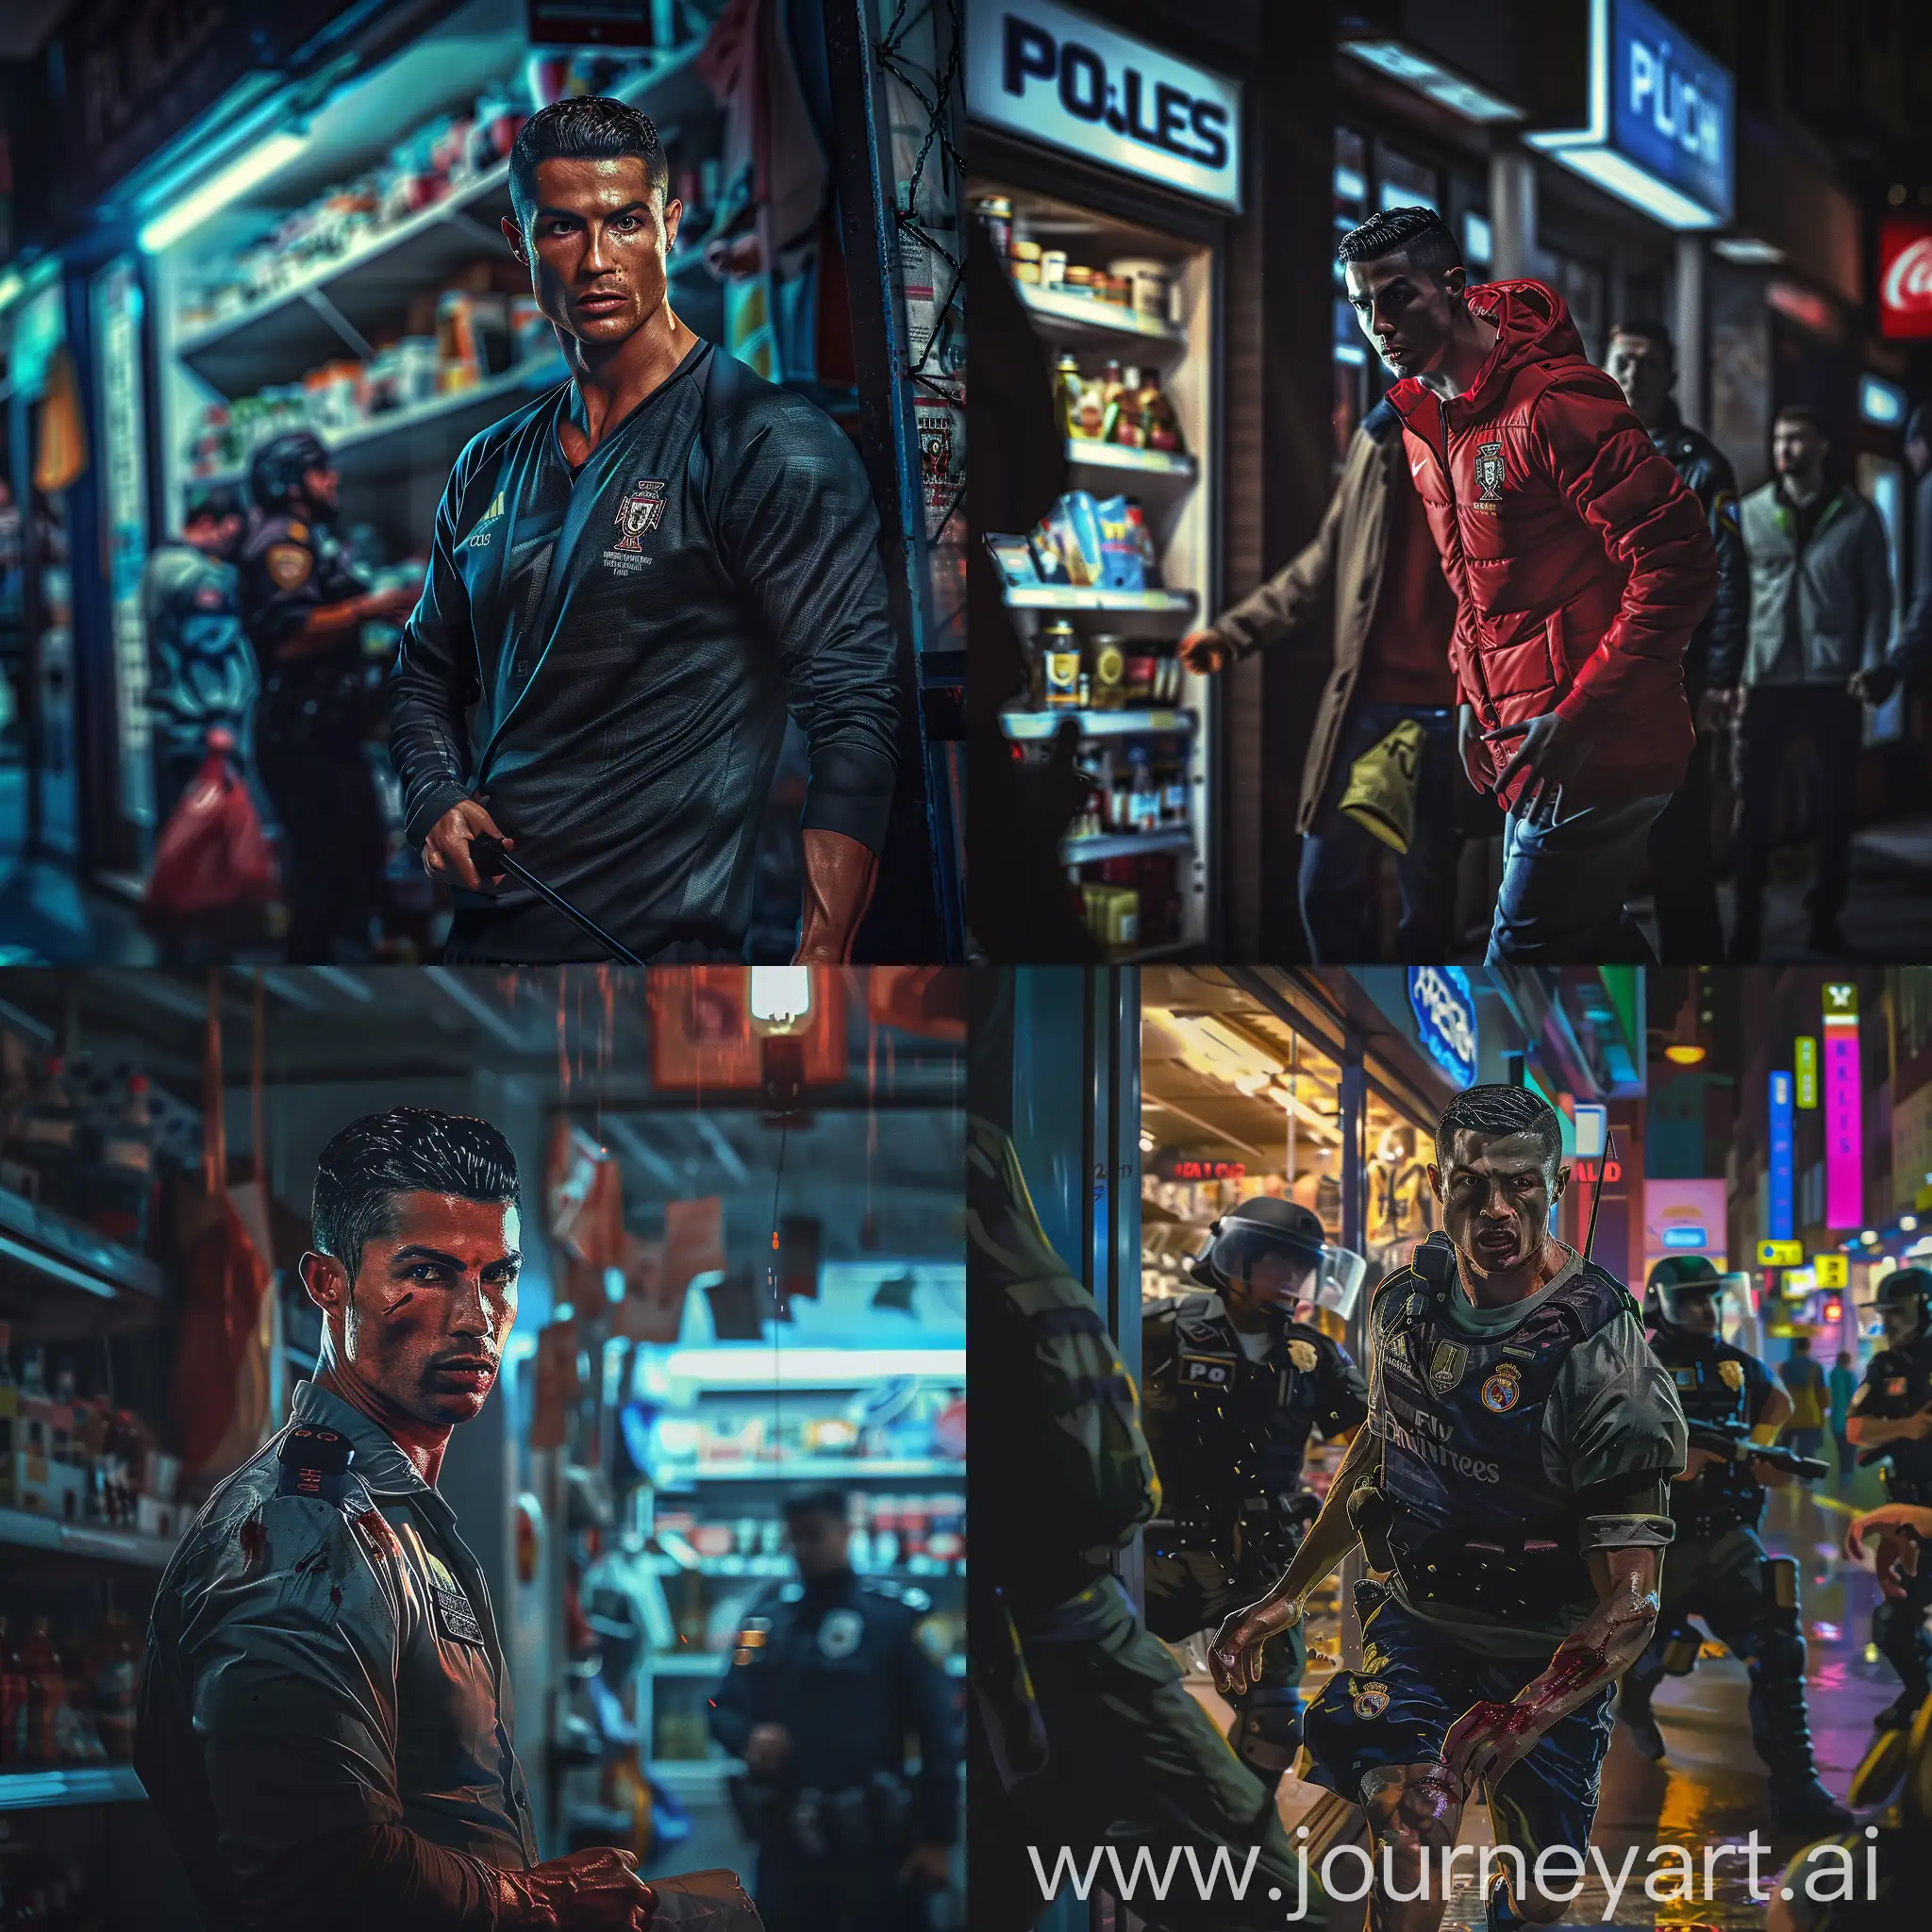 Cristiano-Ronaldo-Caught-in-Nighttime-Robbery-Pursued-by-Police